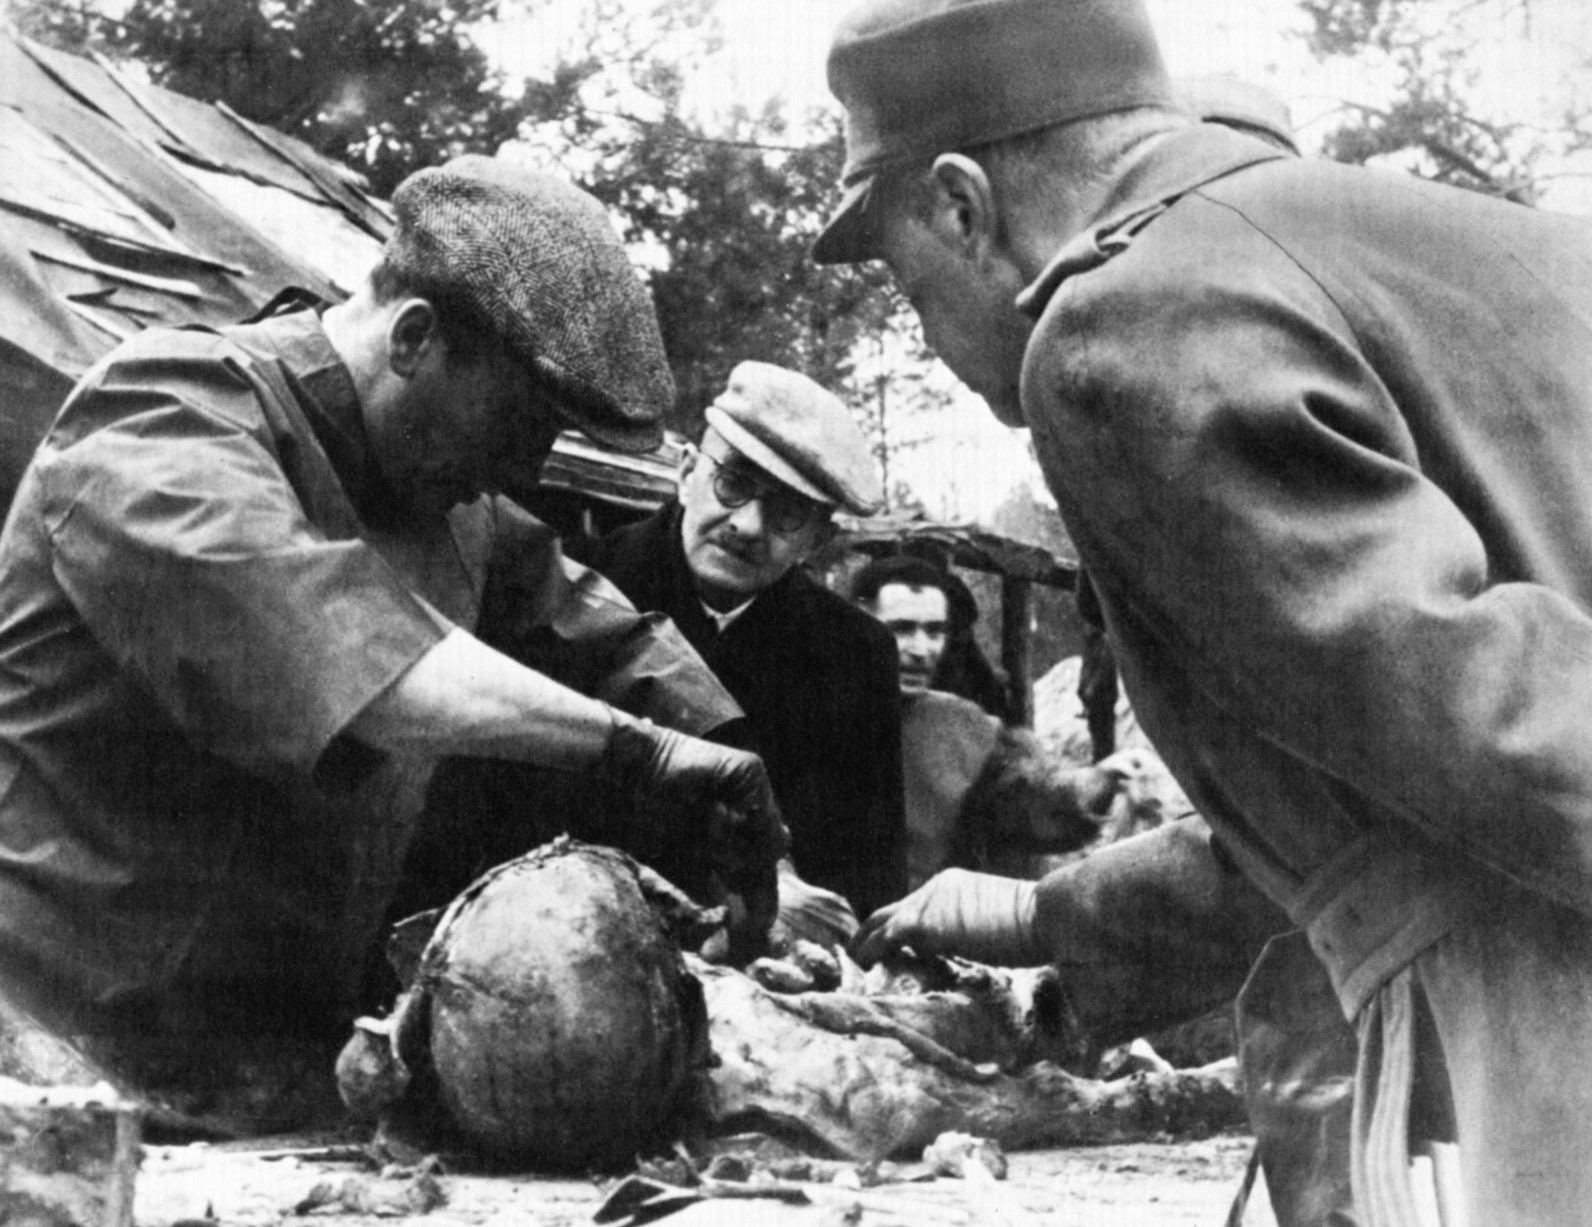 A pathologist dissects a body unearthed in the Katyn Forest during a German investigation of the incident.